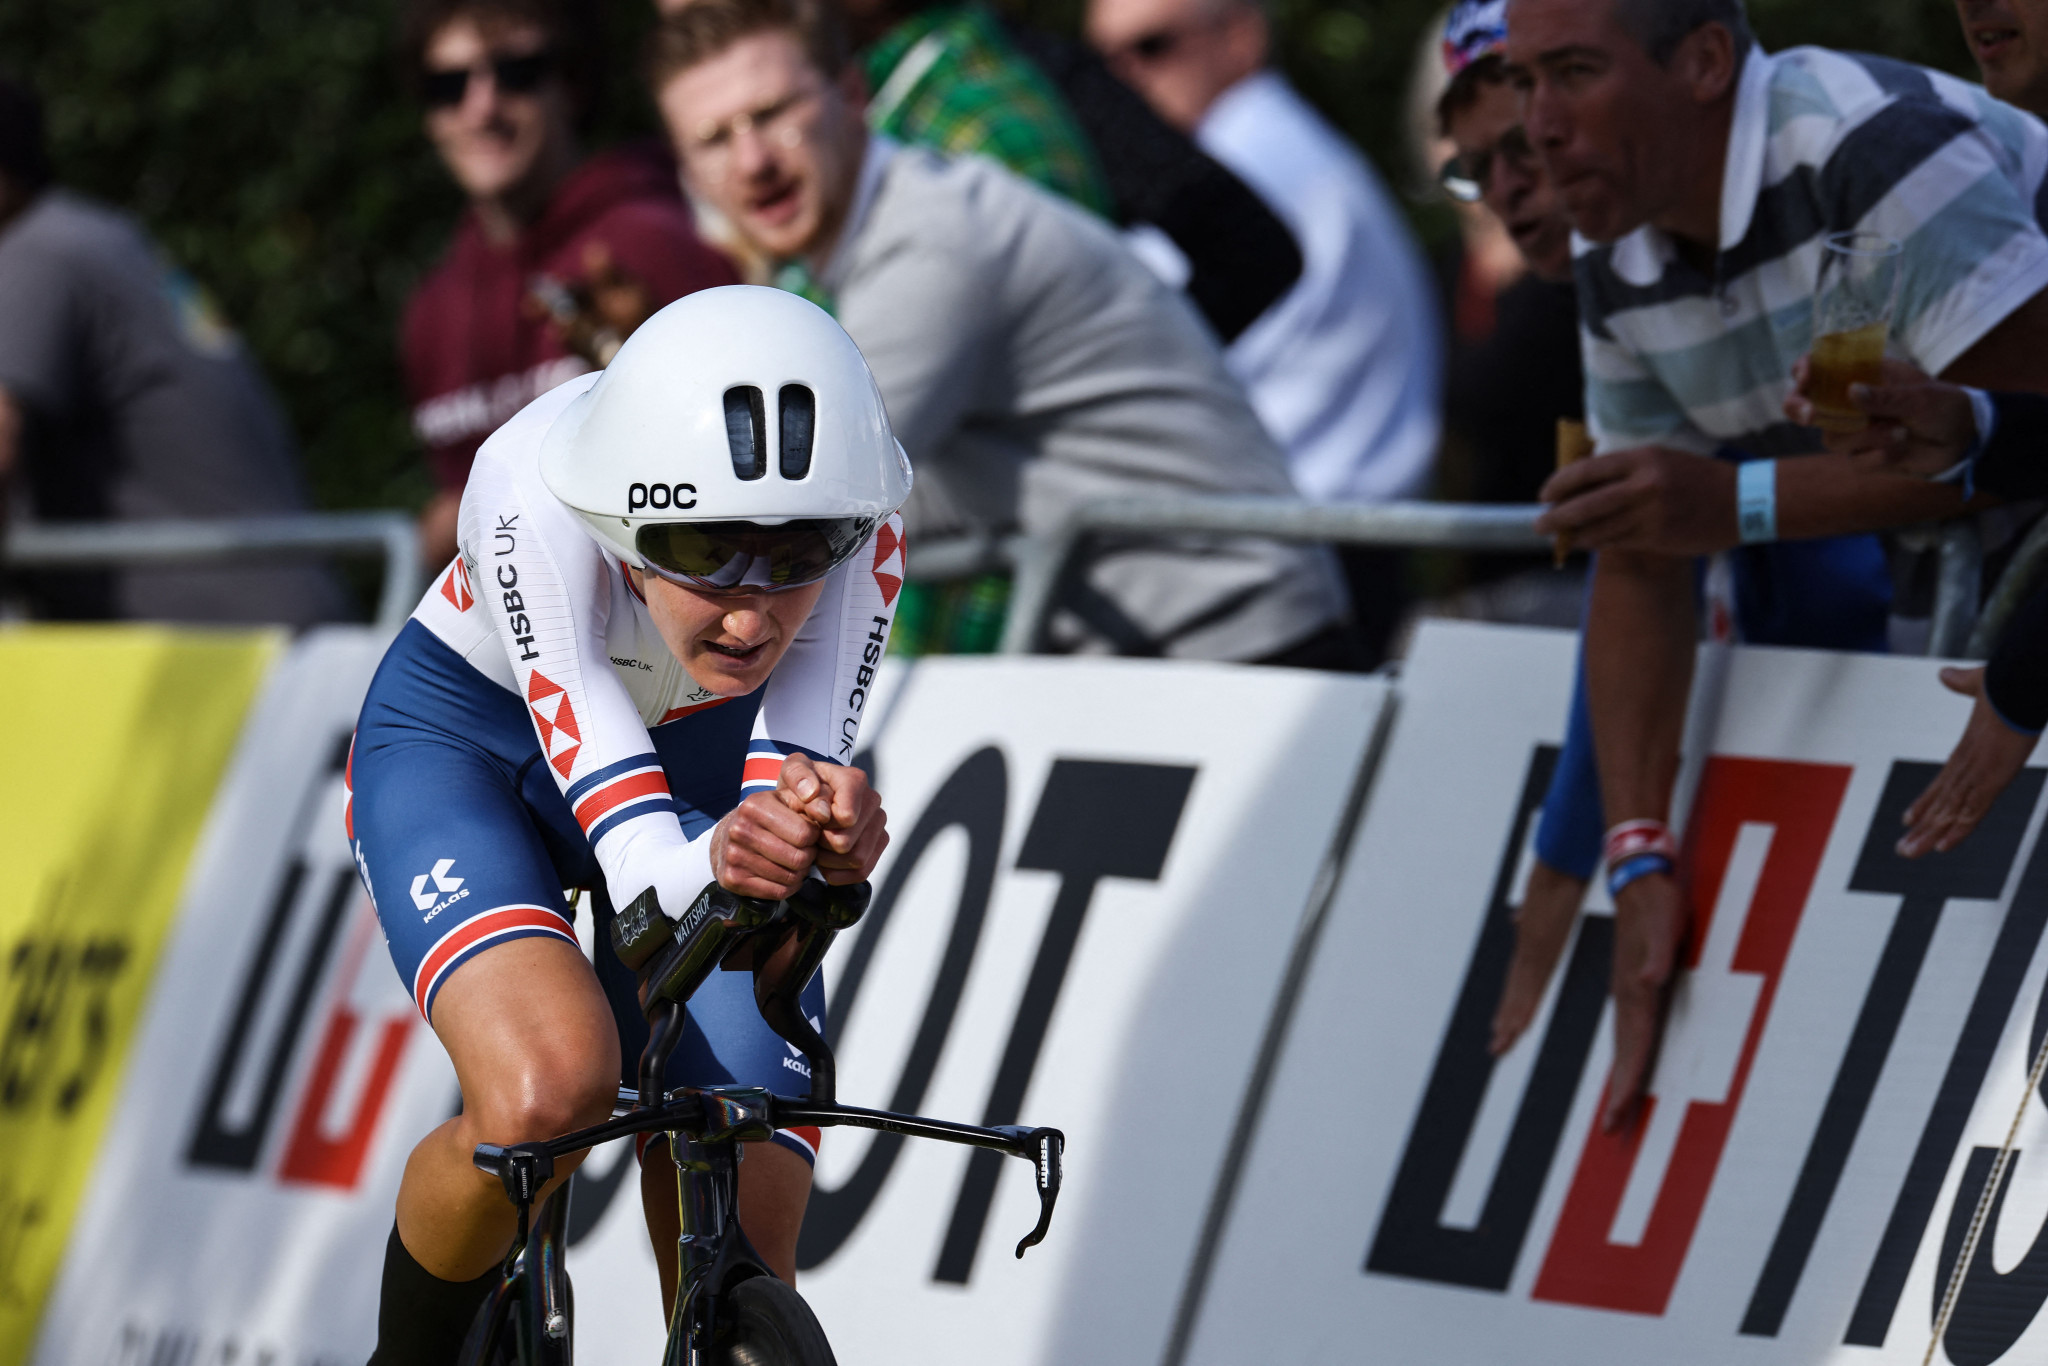 Lowden smashes women's UCI hour record, covering 48.405km